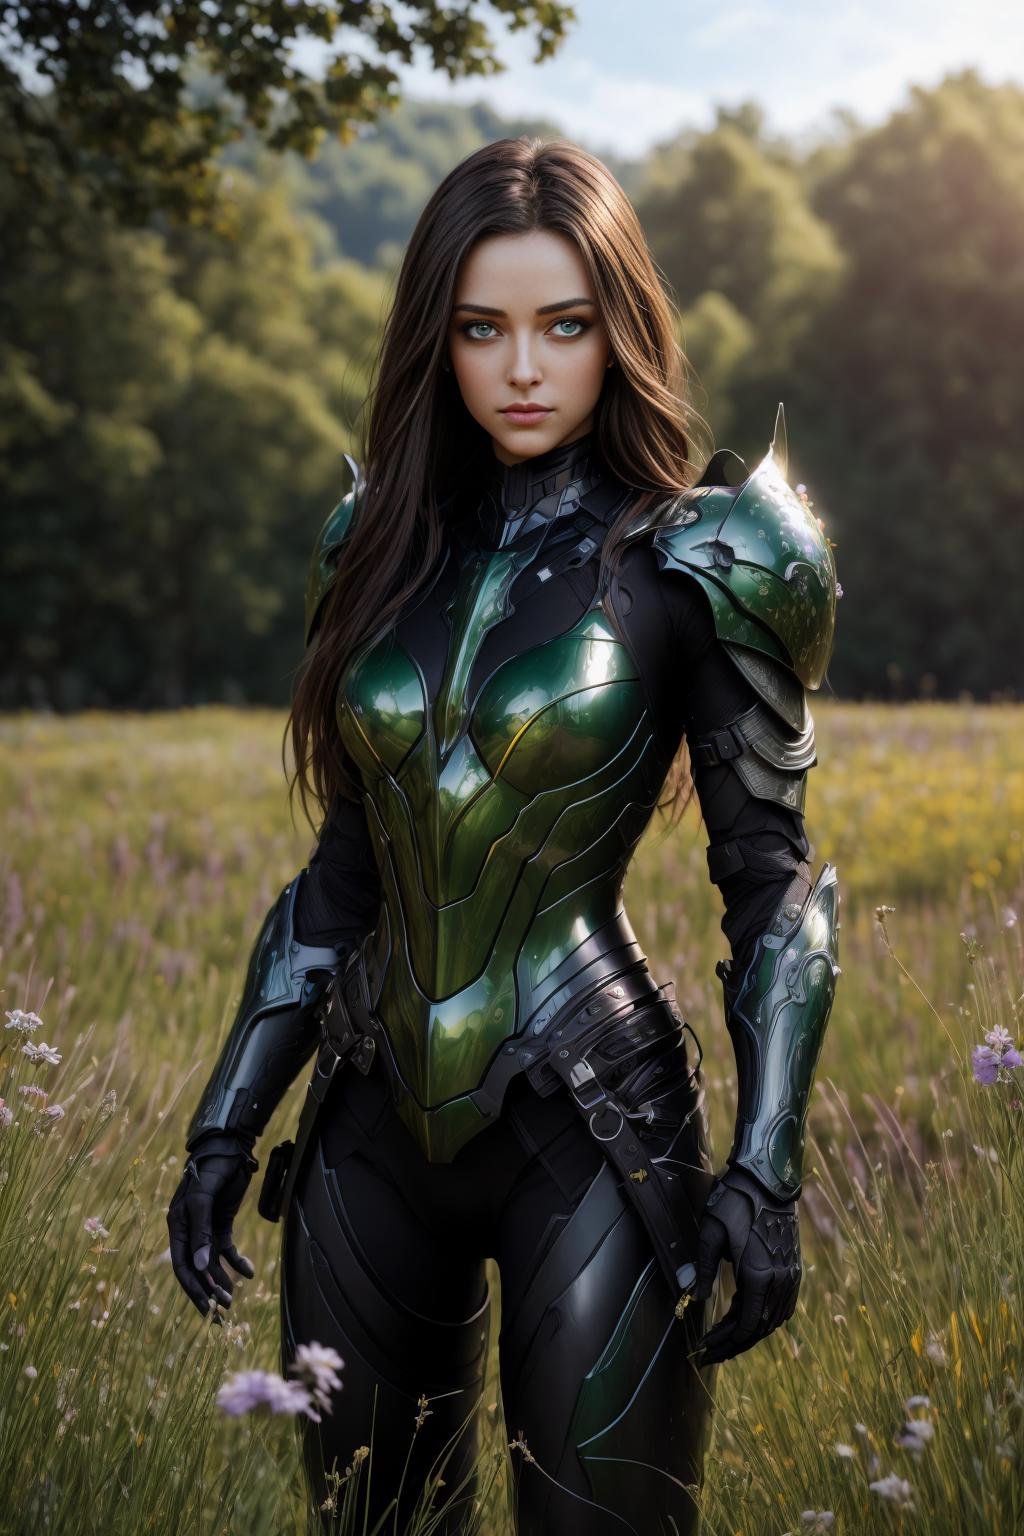 <lora:hades_armor_v3:0.7>masterpice, highly detailed photorealistic raw photography, best quality, volumetric lighting, volumetric shadows1girl in dark hades_armor, green eyesmeadow background with multicolor flowers